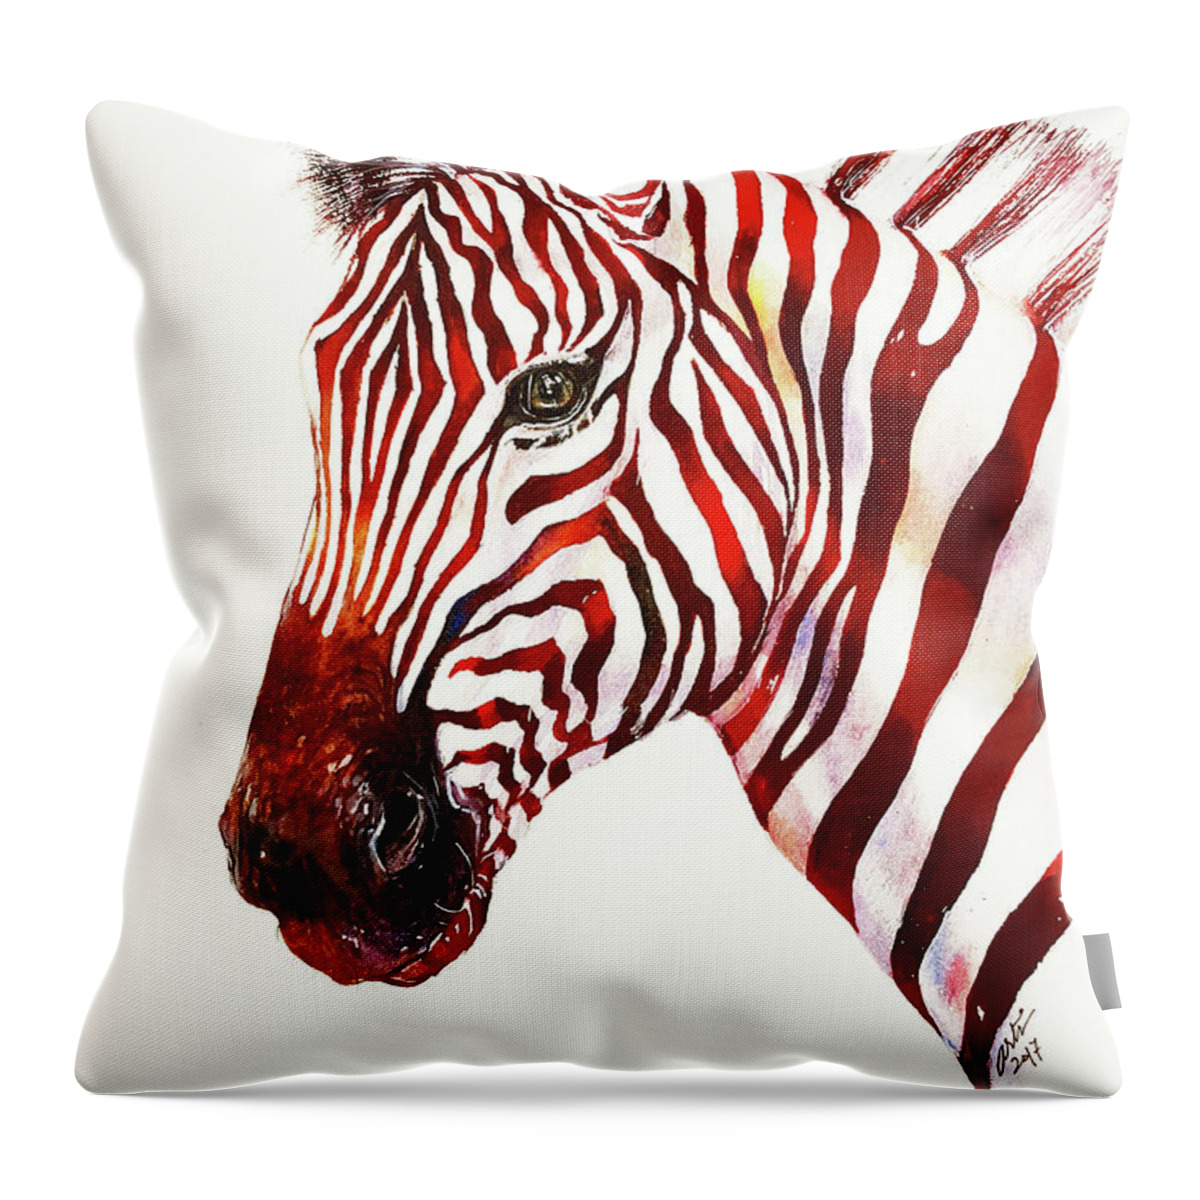 Zebra Throw Pillow featuring the painting Red Rodney Zebra by Arti Chauhan